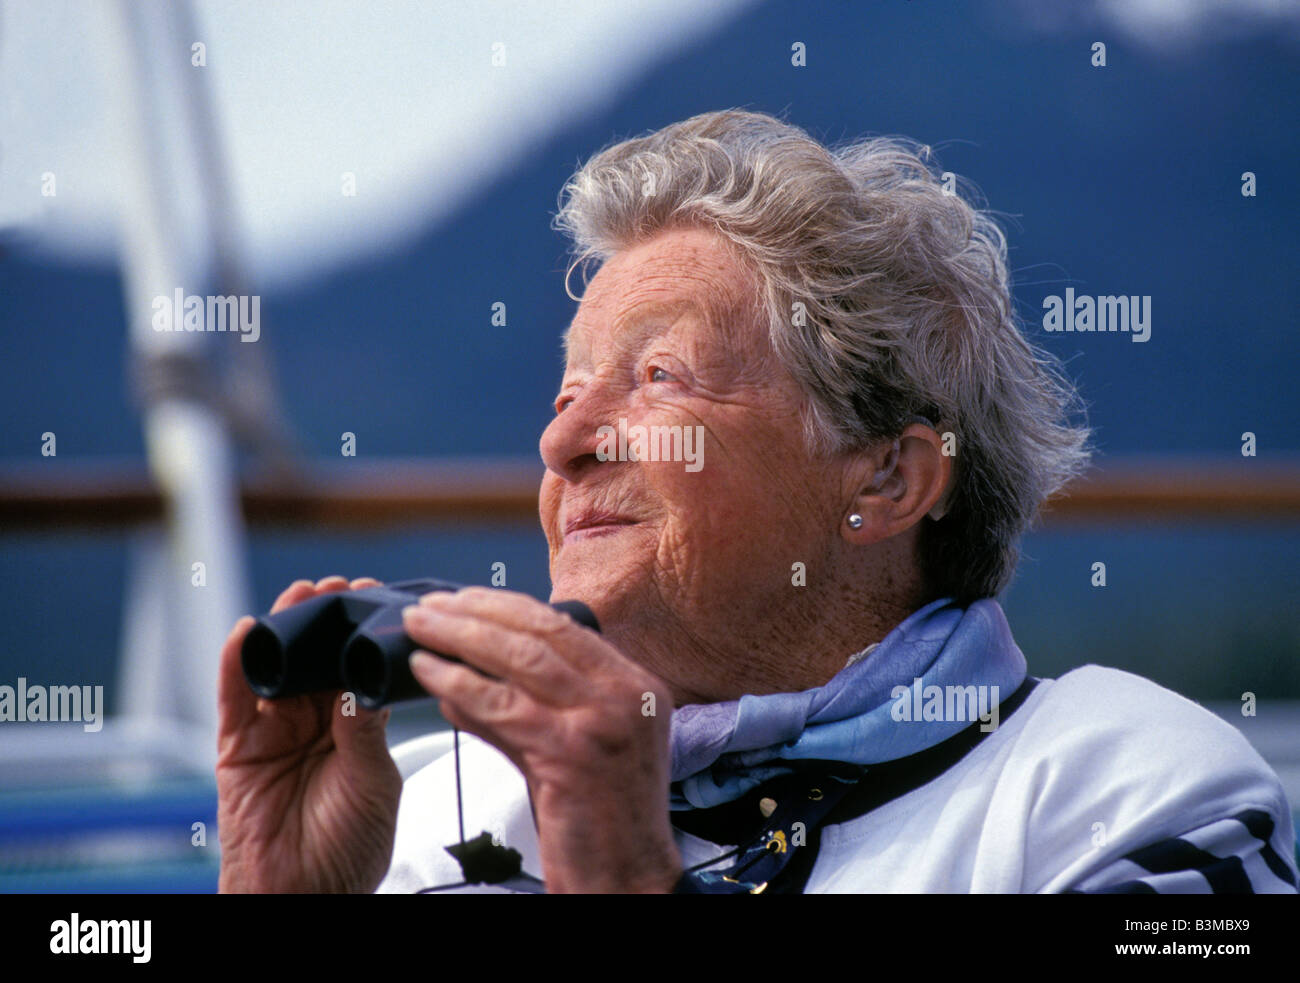 Portrait of Woman Senior Citizen with binoculars enjoying a day of cruising on a cruise ship in the great outdoors Stock Photo